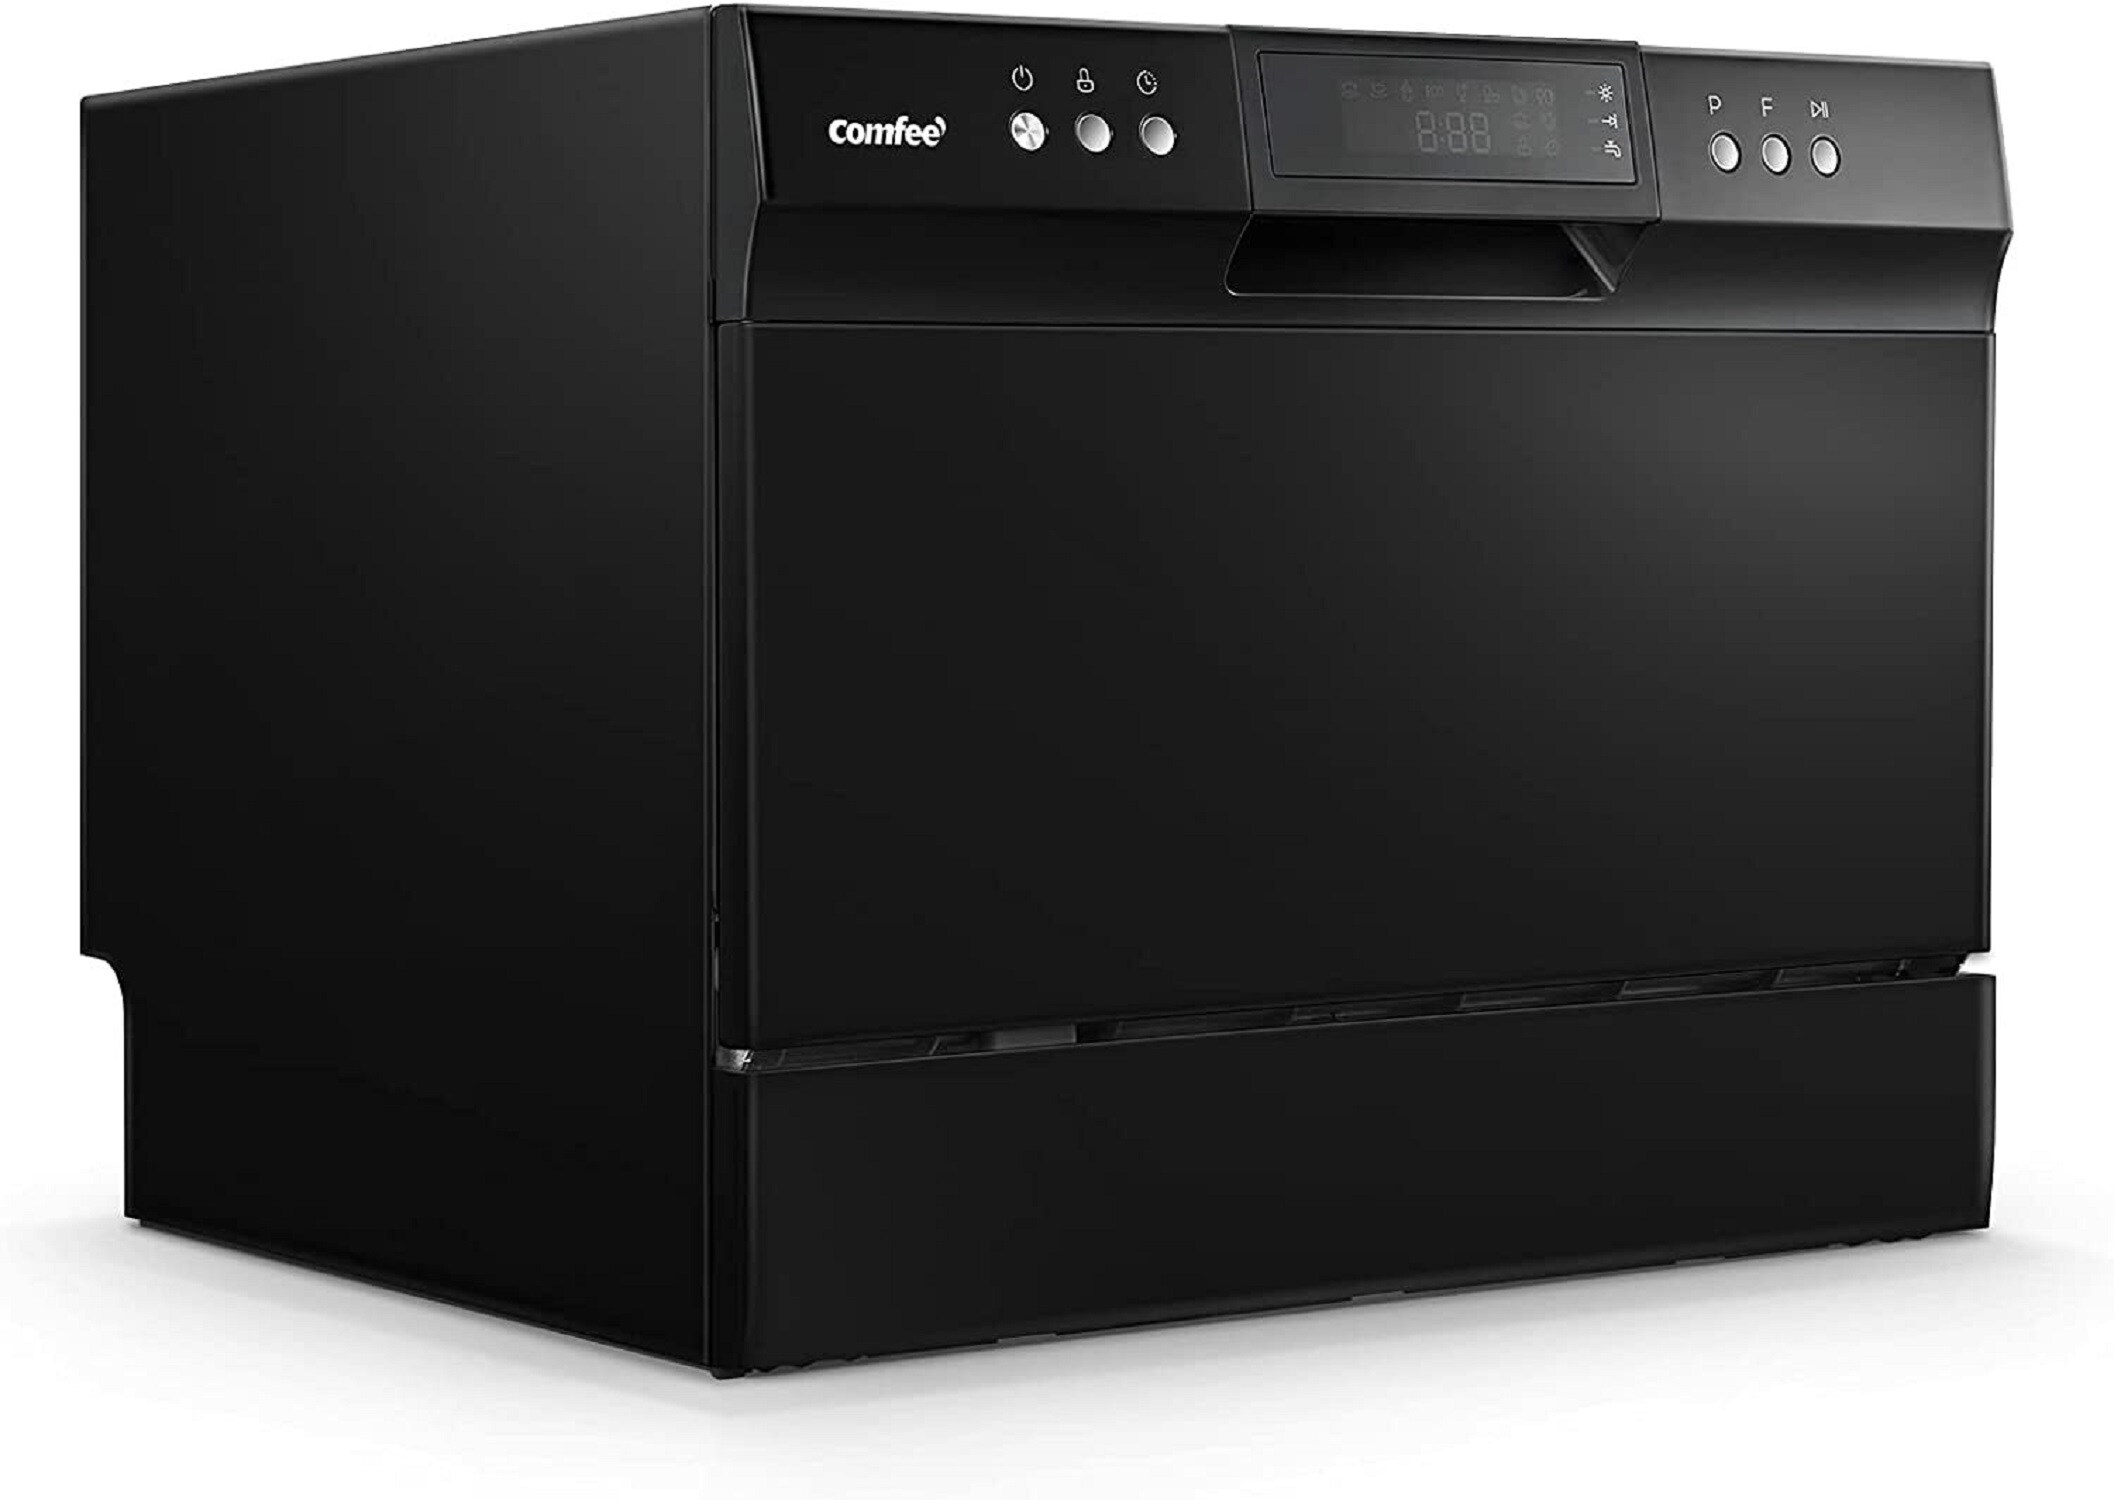 Comfee Countertop Dishwasher - appliances - by owner - sale - craigslist